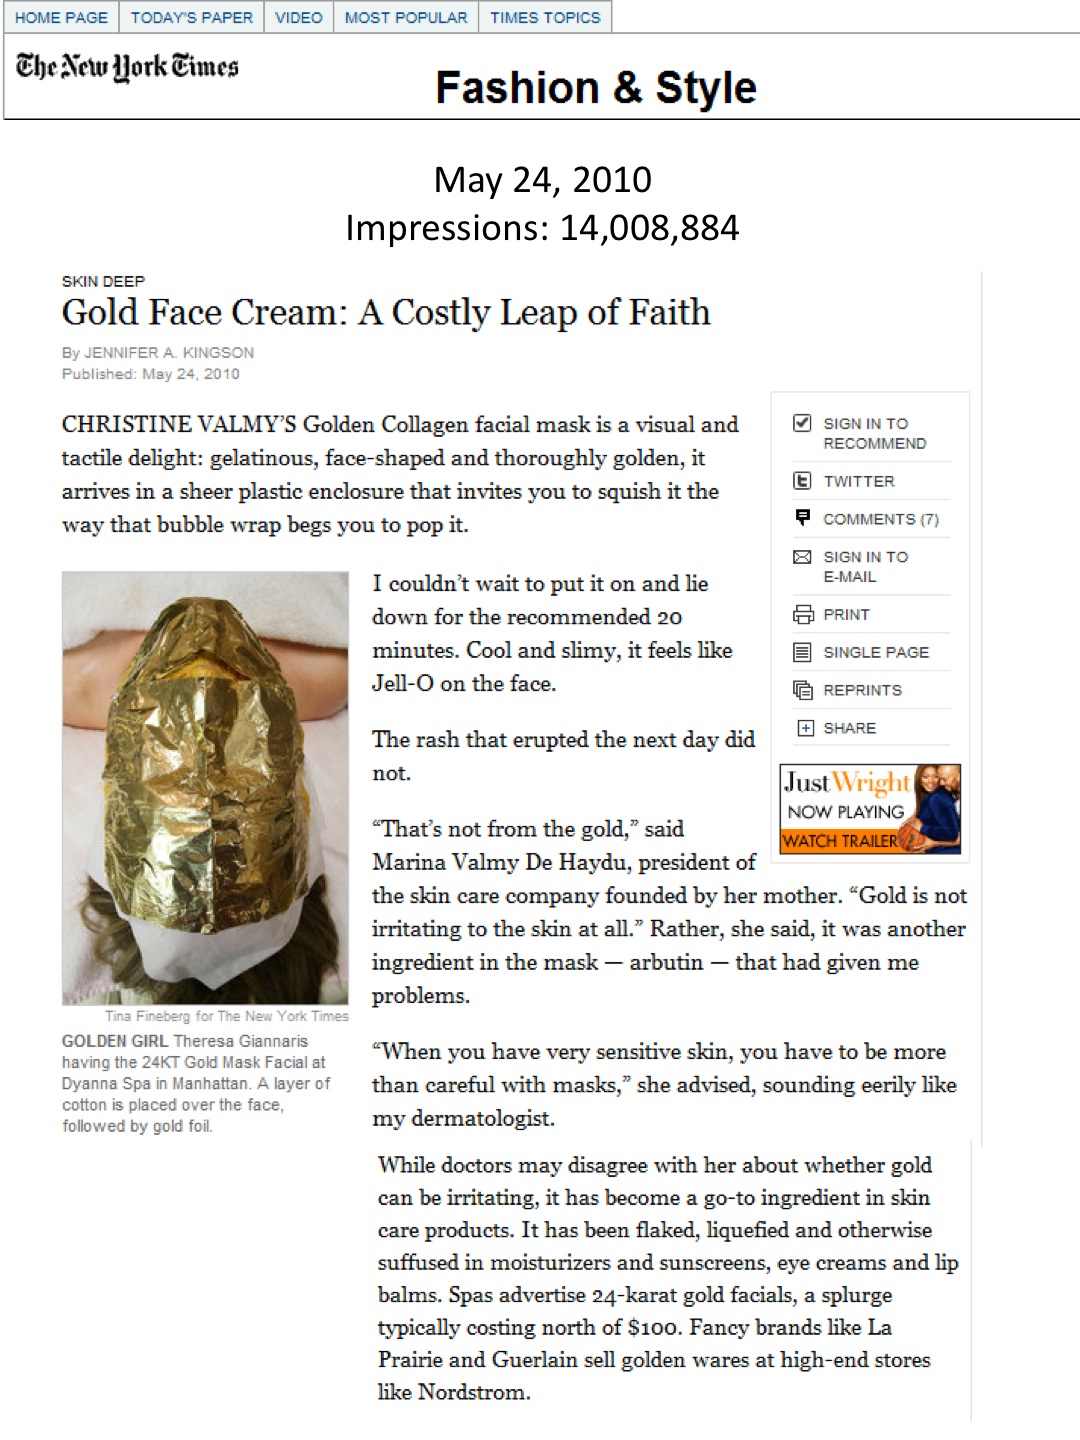 Dyanna Body & Nail Spa's 24 Karat (24Kt) Gold Facial Featured in the New York Times! (Beauty PR)